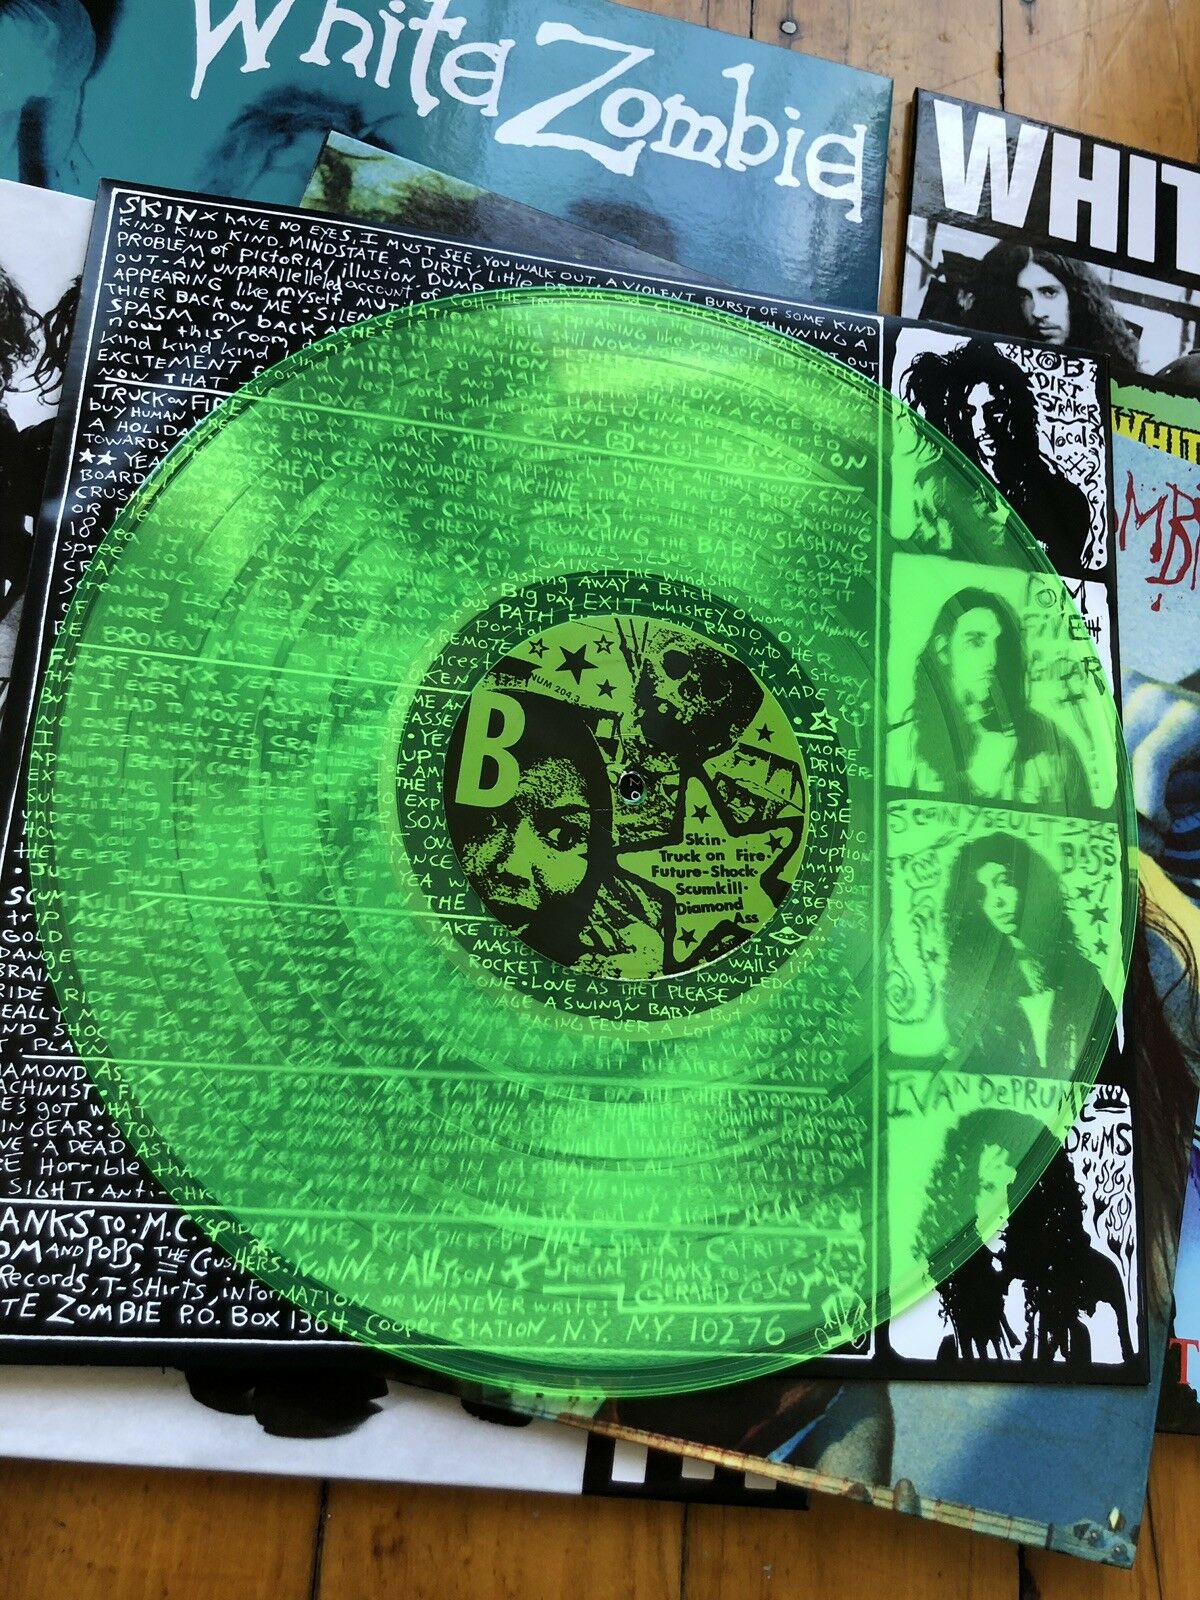 WHITE ZOMBIE /IT CAME FROM LP BOX